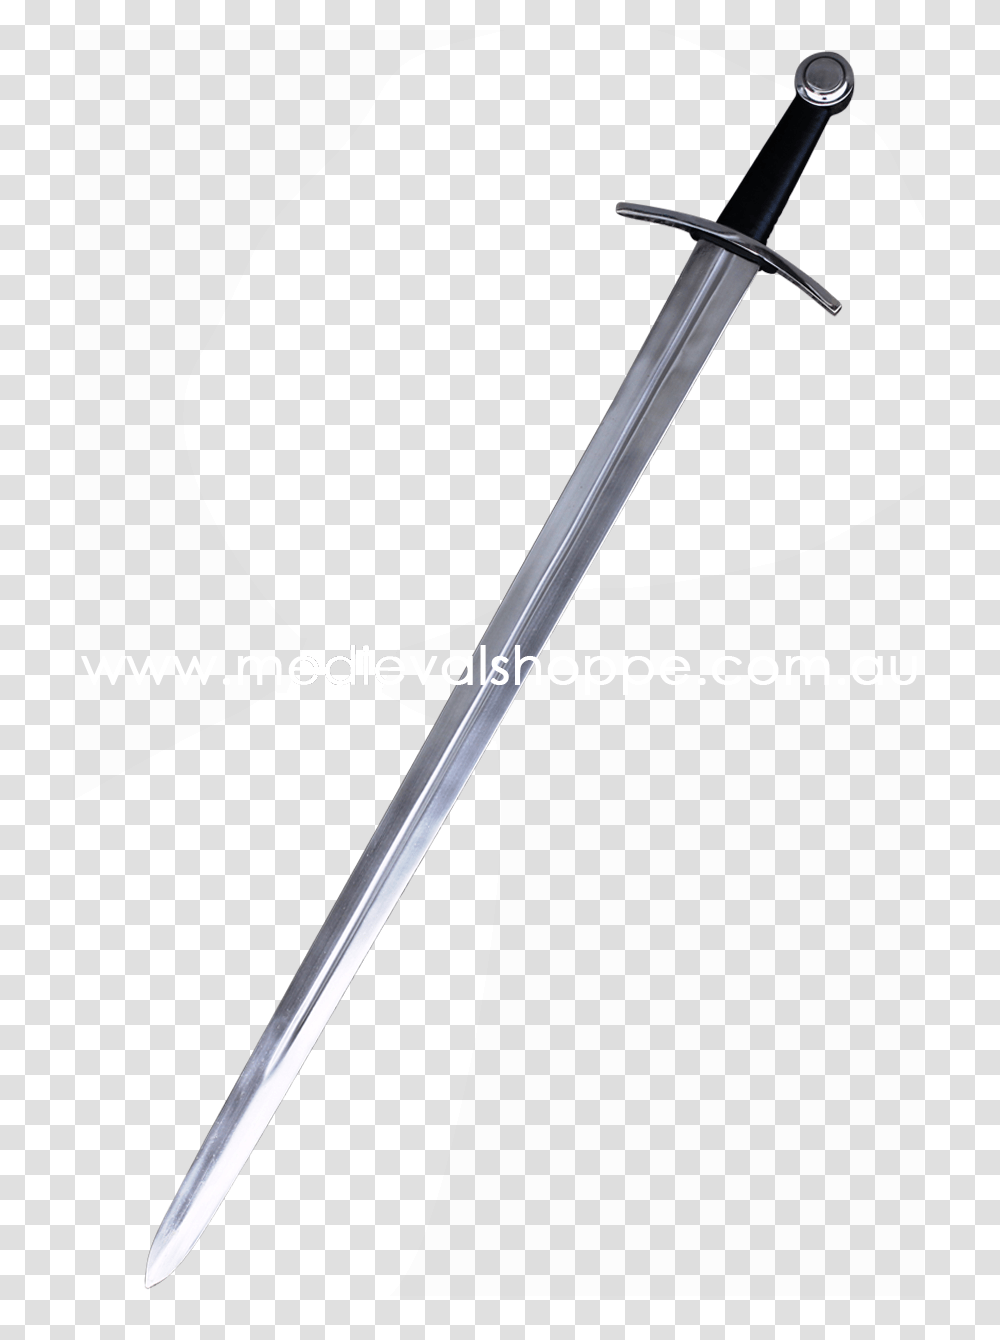 Medieval Crossed Swords Swords Battle Blades Free Vector Weapon Weaponry Duel Wand Transparent Png Pngset Com